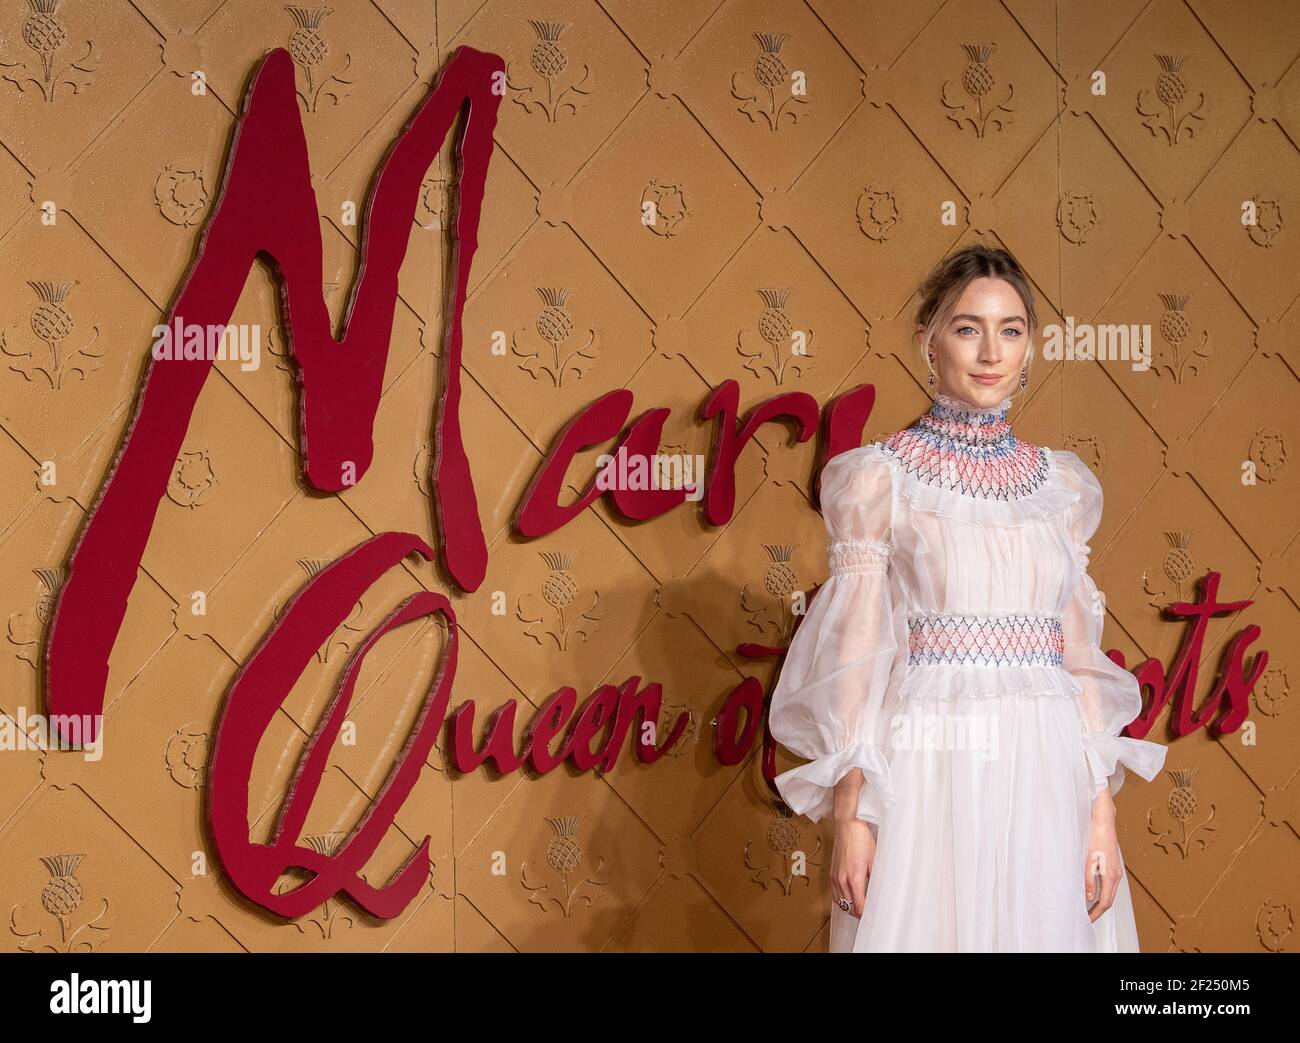 London, United Kingdom. 11th December 2018. Saoirse Ronan attending 'Mary Queen of Scots' film premiere, Arrivals, London, United Kingdom. Stock Photo